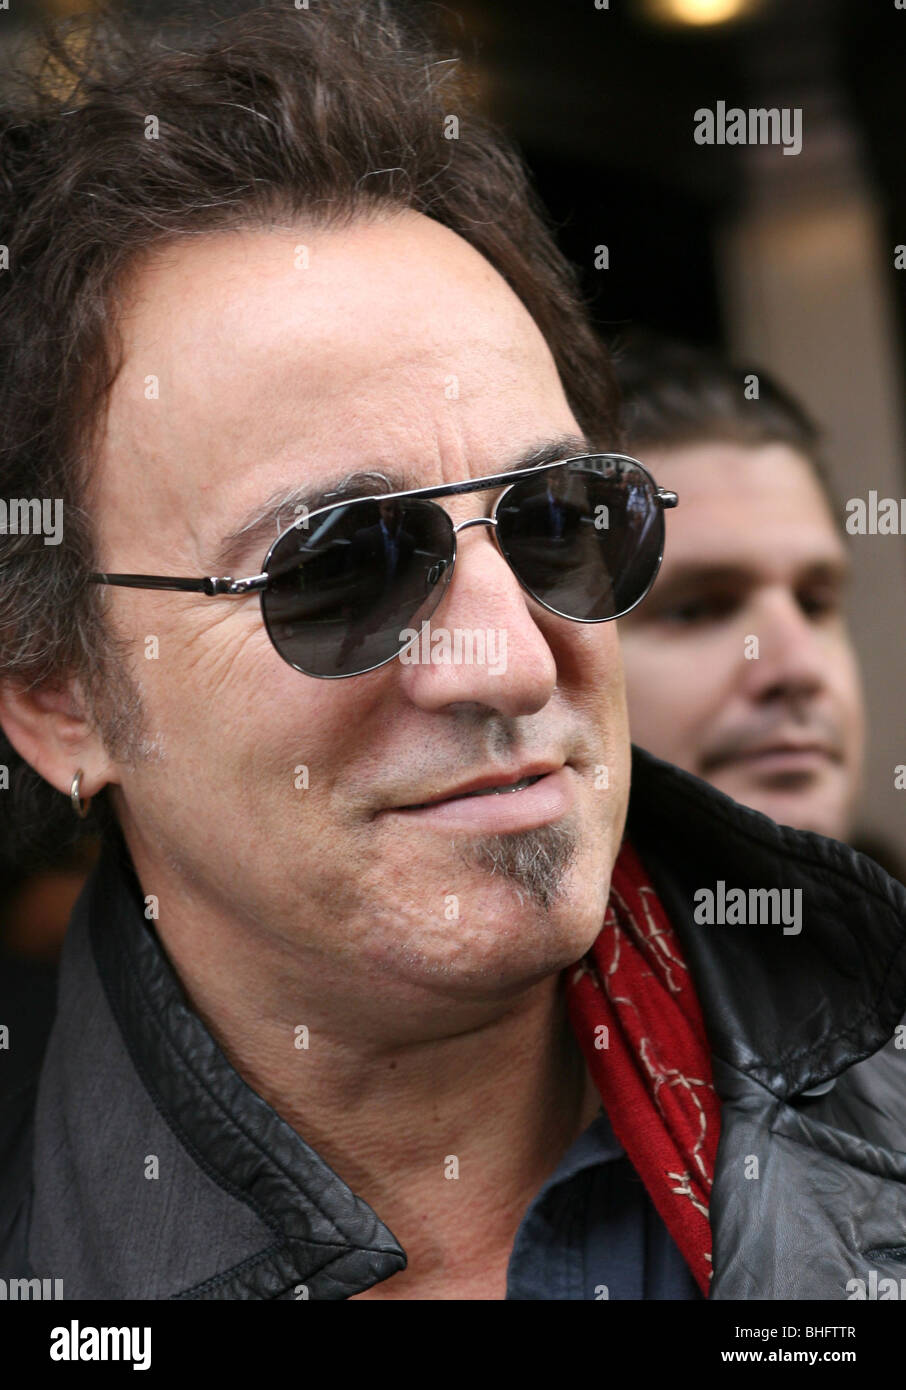 BRUCE SPRINGSTEEN LEAVING A HOTEL IN LONDON Stock Photo